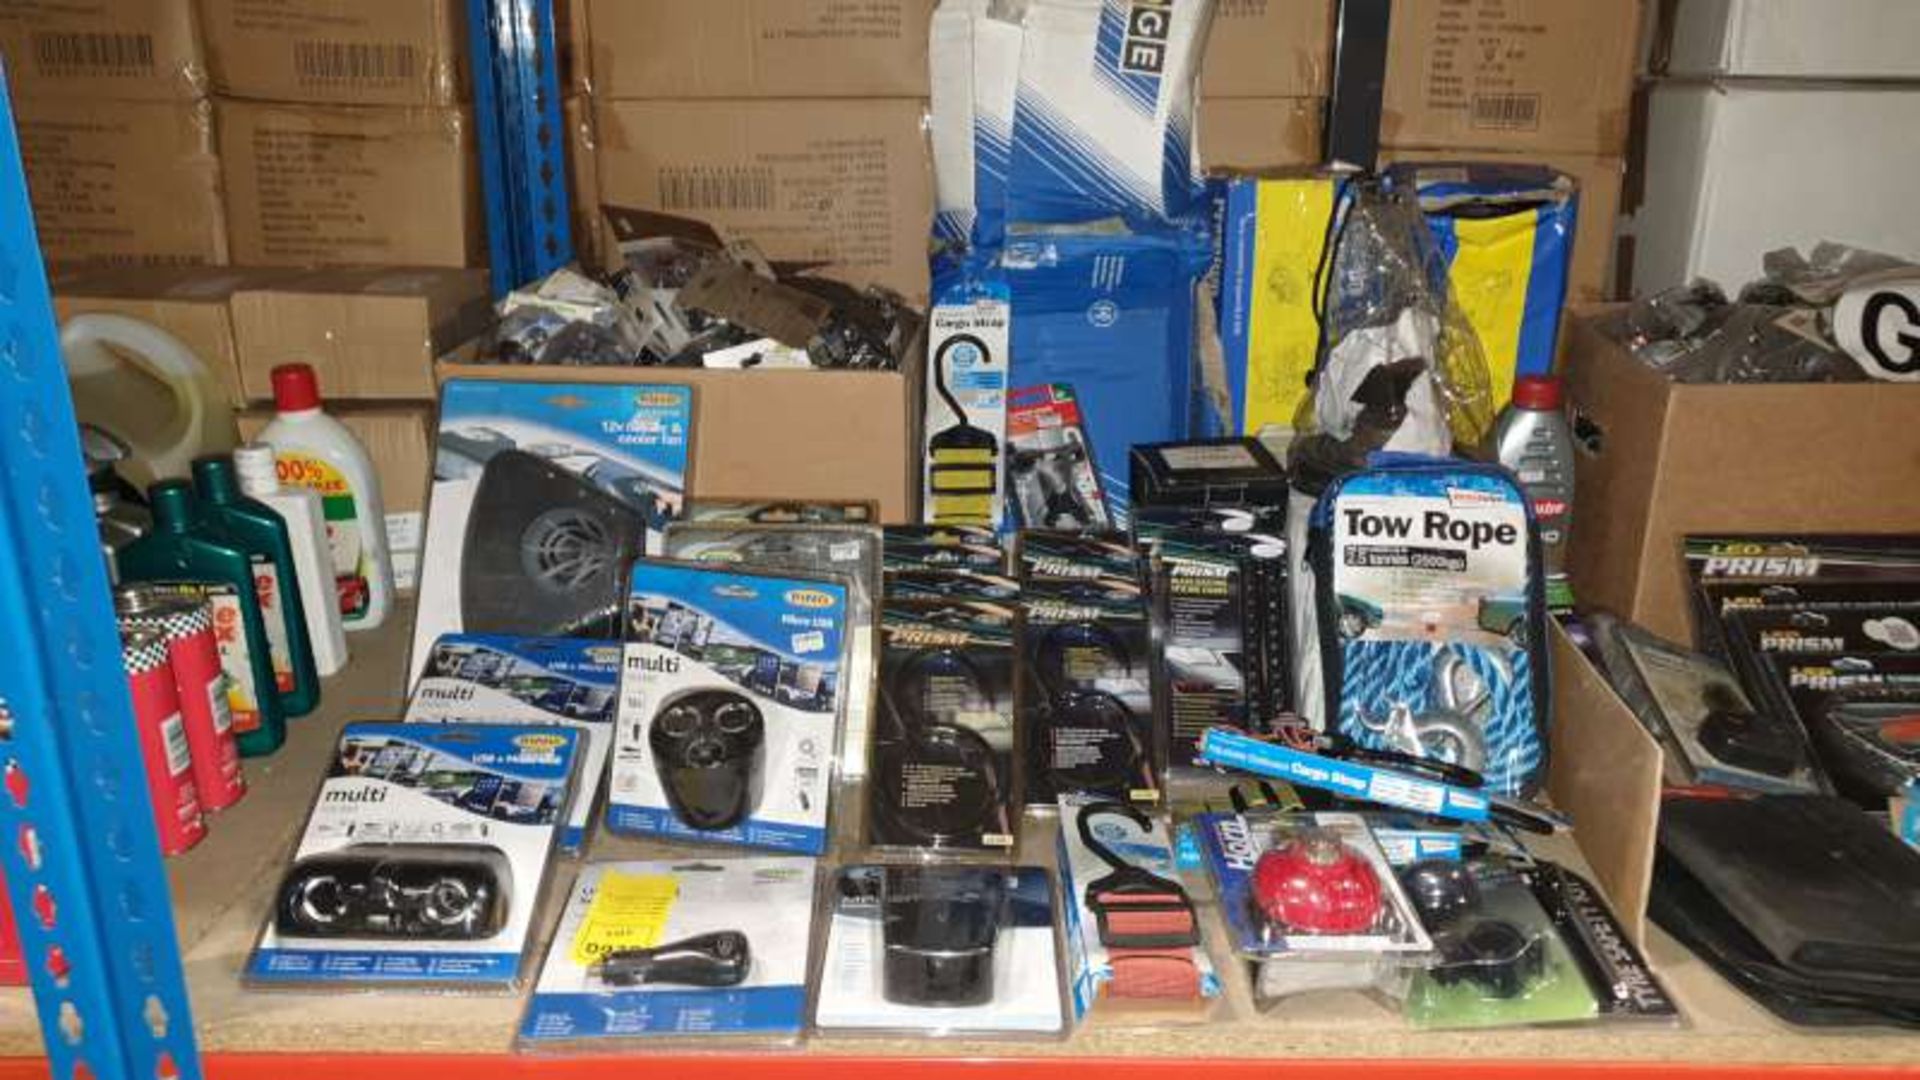 LOT CONTAINING MULTI SOCKETS, TOW ROPES, LED PRISM HEADLAMPS, COOLER FANS, ETC